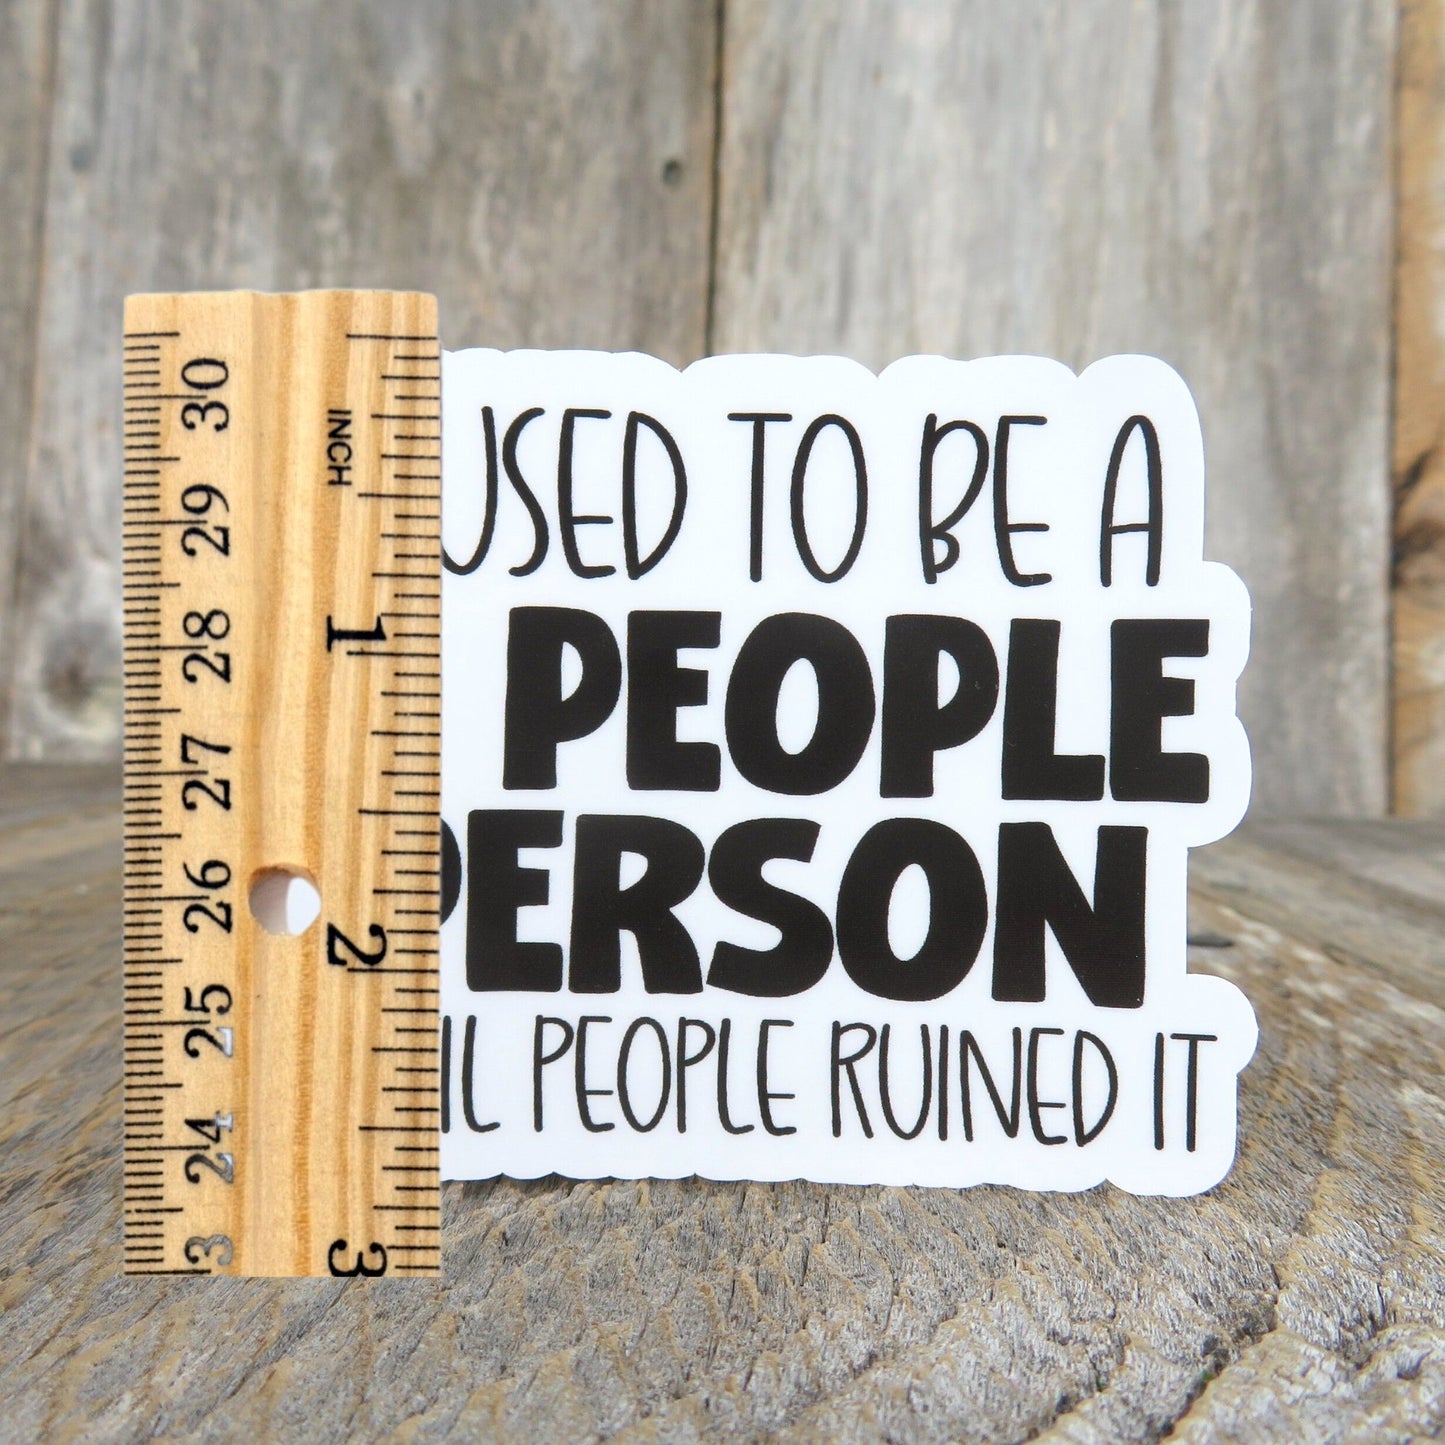 I Used To Be A People Person Sticker Antisocial Funny Sarcastic Water Bottle